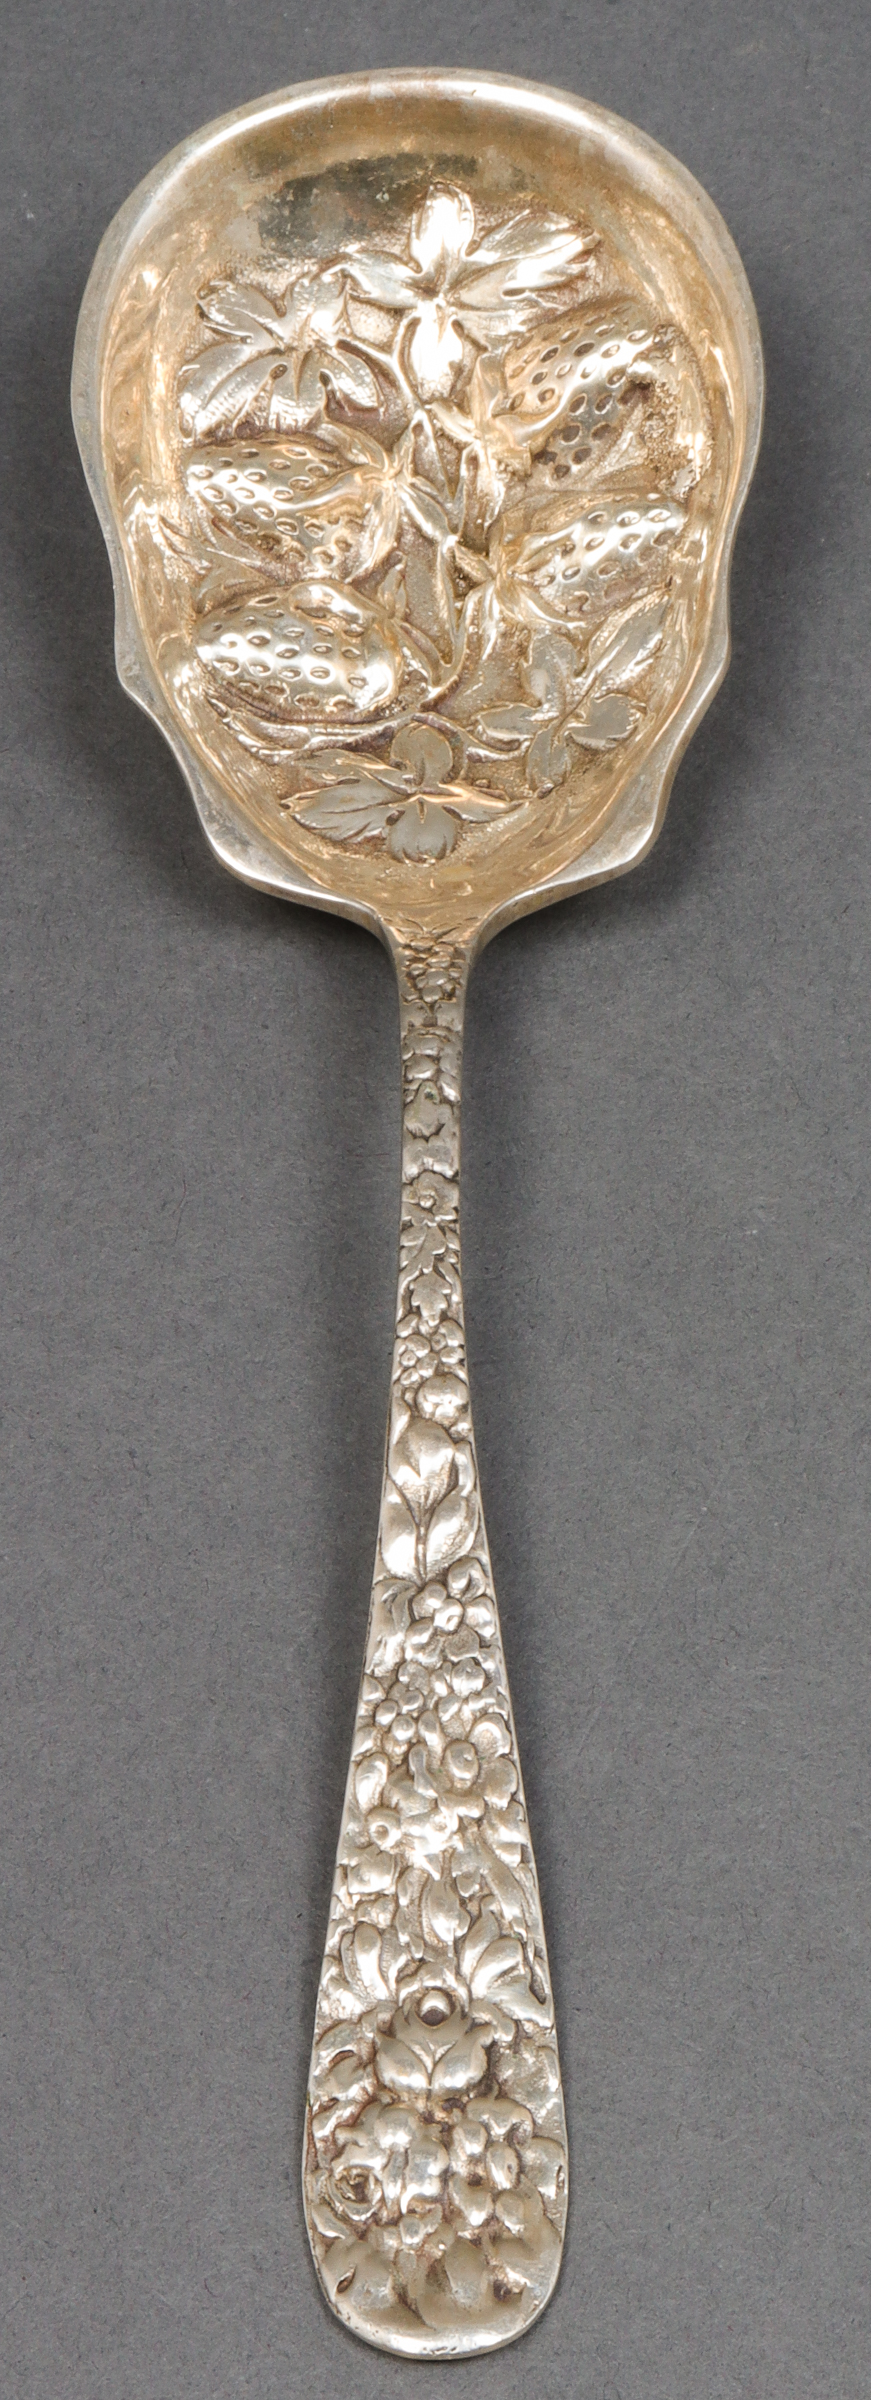 STERLING SILVER REPOUSSE BERRY